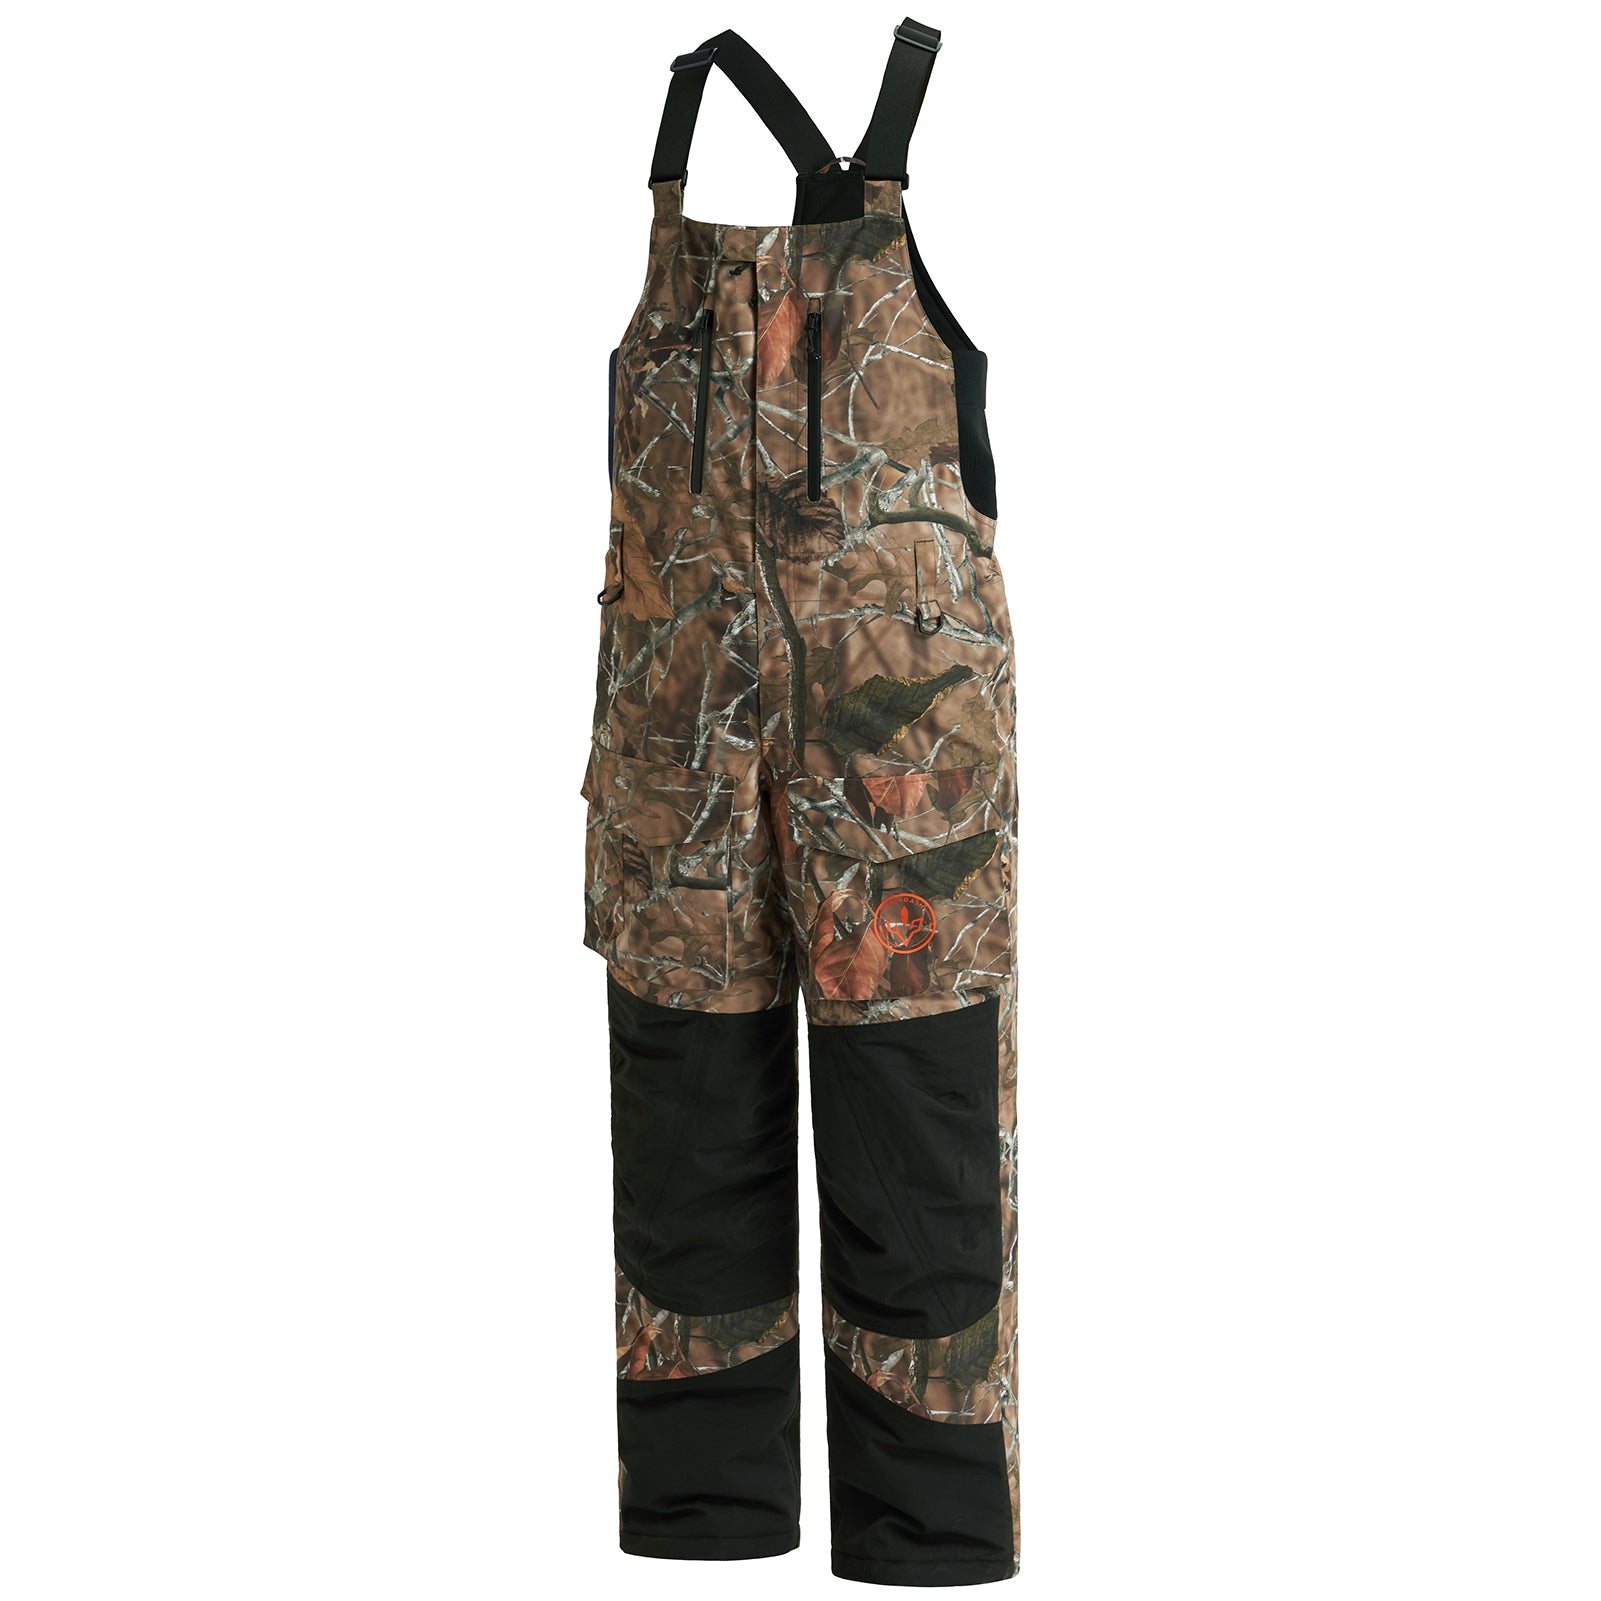 Men's Splice Insulated Waterproof Fishing Hunting Bibs, Autumn Forest/Black / X-Large